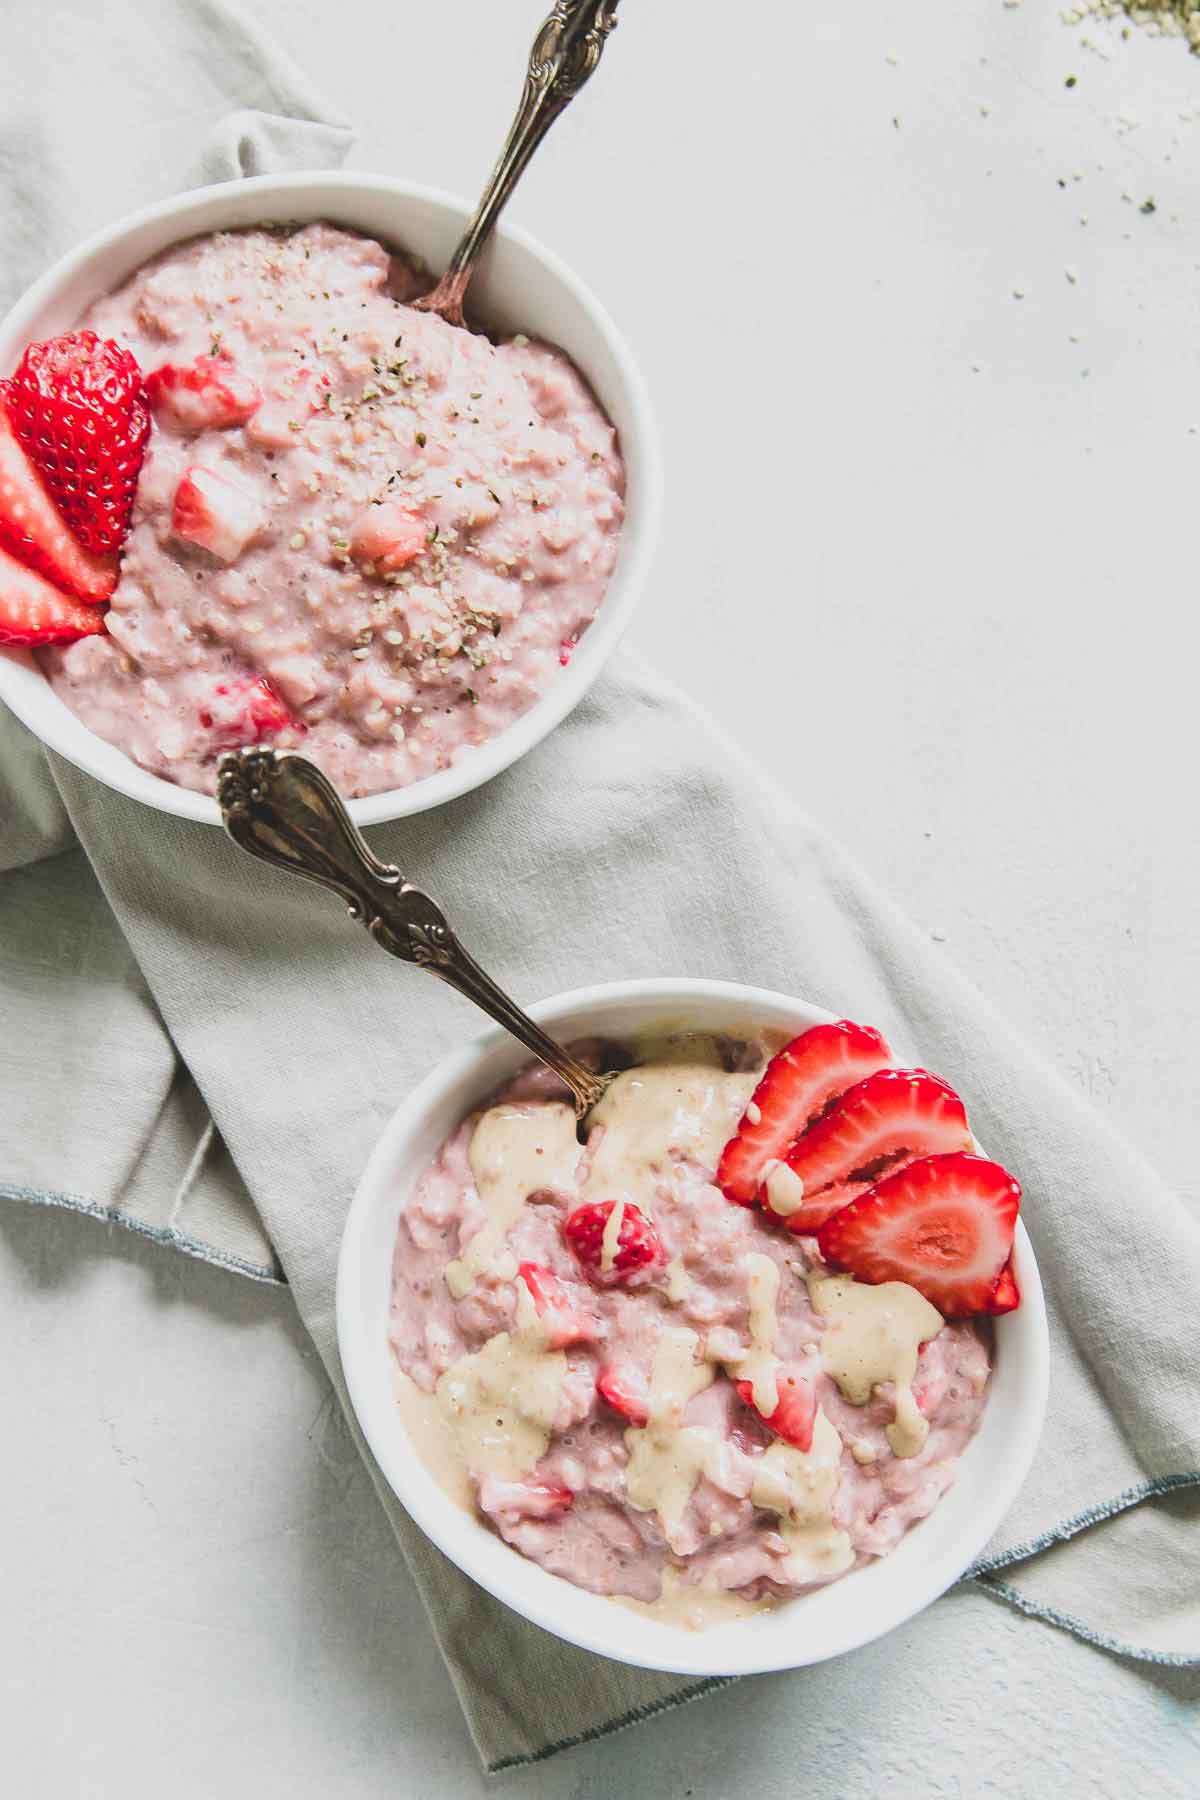 Learn how to make strawberry oatmeal with this simple stove top method and fresh strawberries.